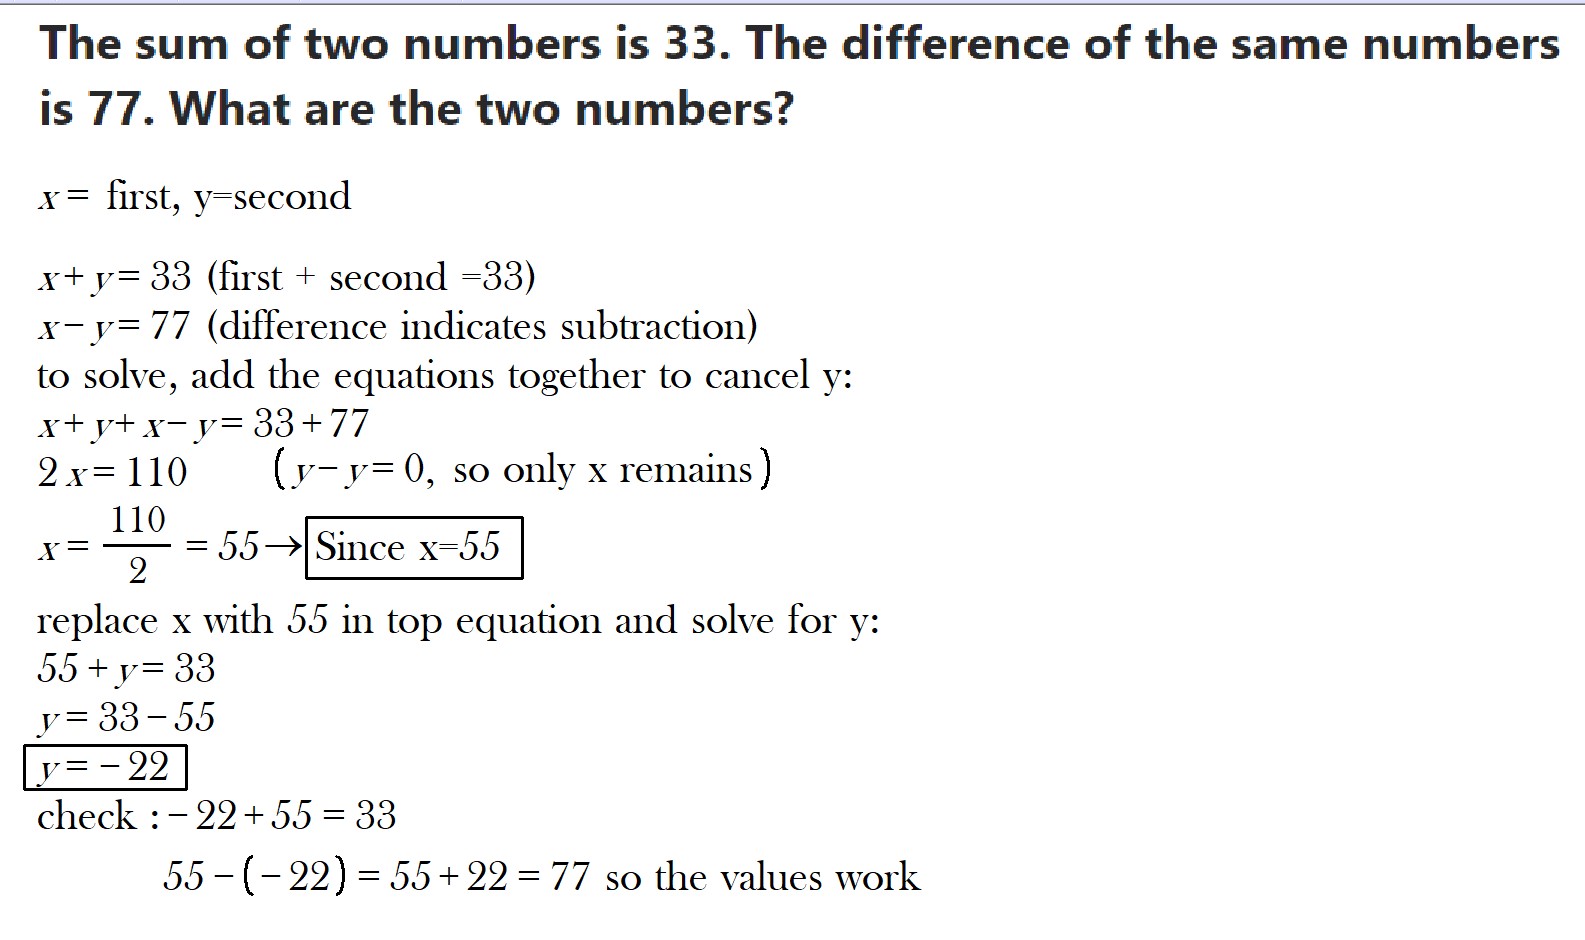 two numbers add up to 33 and the difference is 77